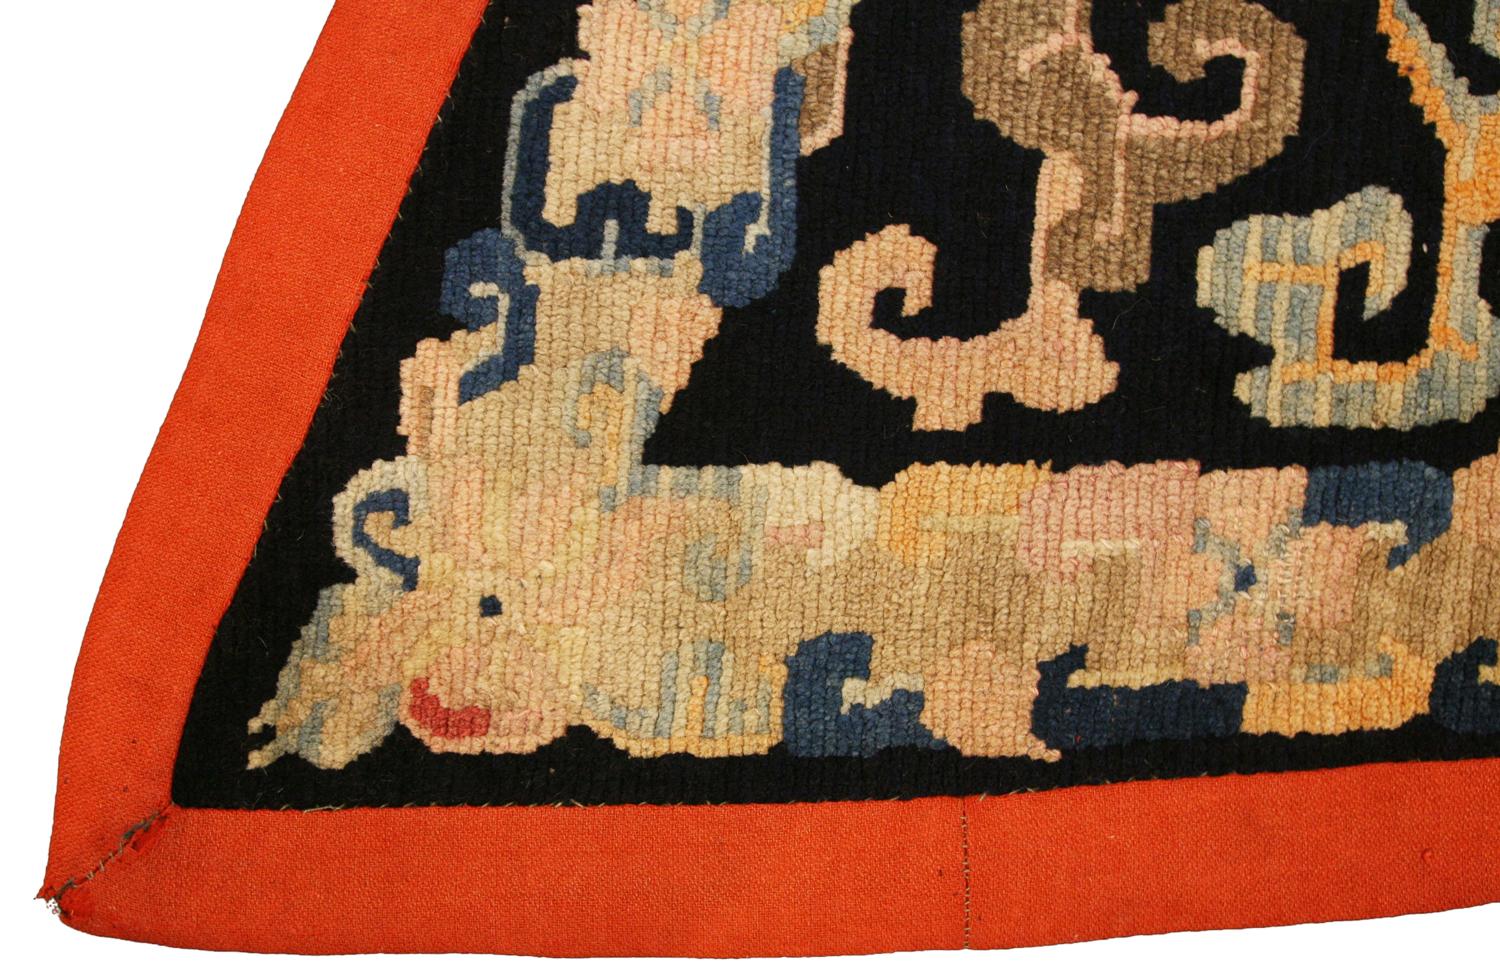 This is an antique Tibetan horse cover woven during the last quarter of the 19th century circa 1880 - 1900 and measures 107 x 70CM in size. Its field is designed with a single large-scale Lotus flower with protruding vines set on a black background